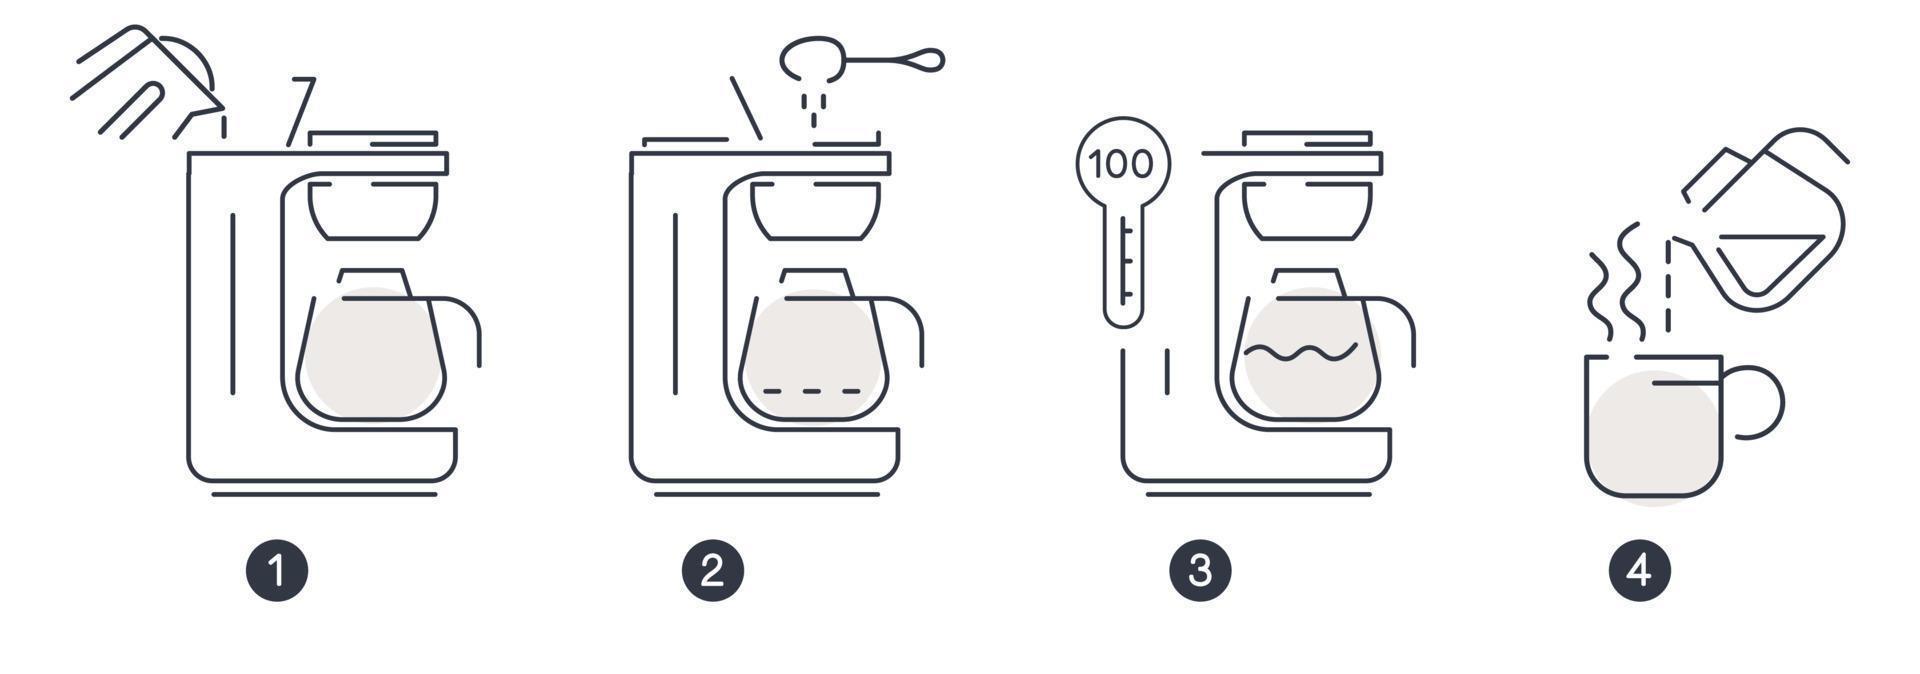 Coffee maker instructions and steps how to use vector